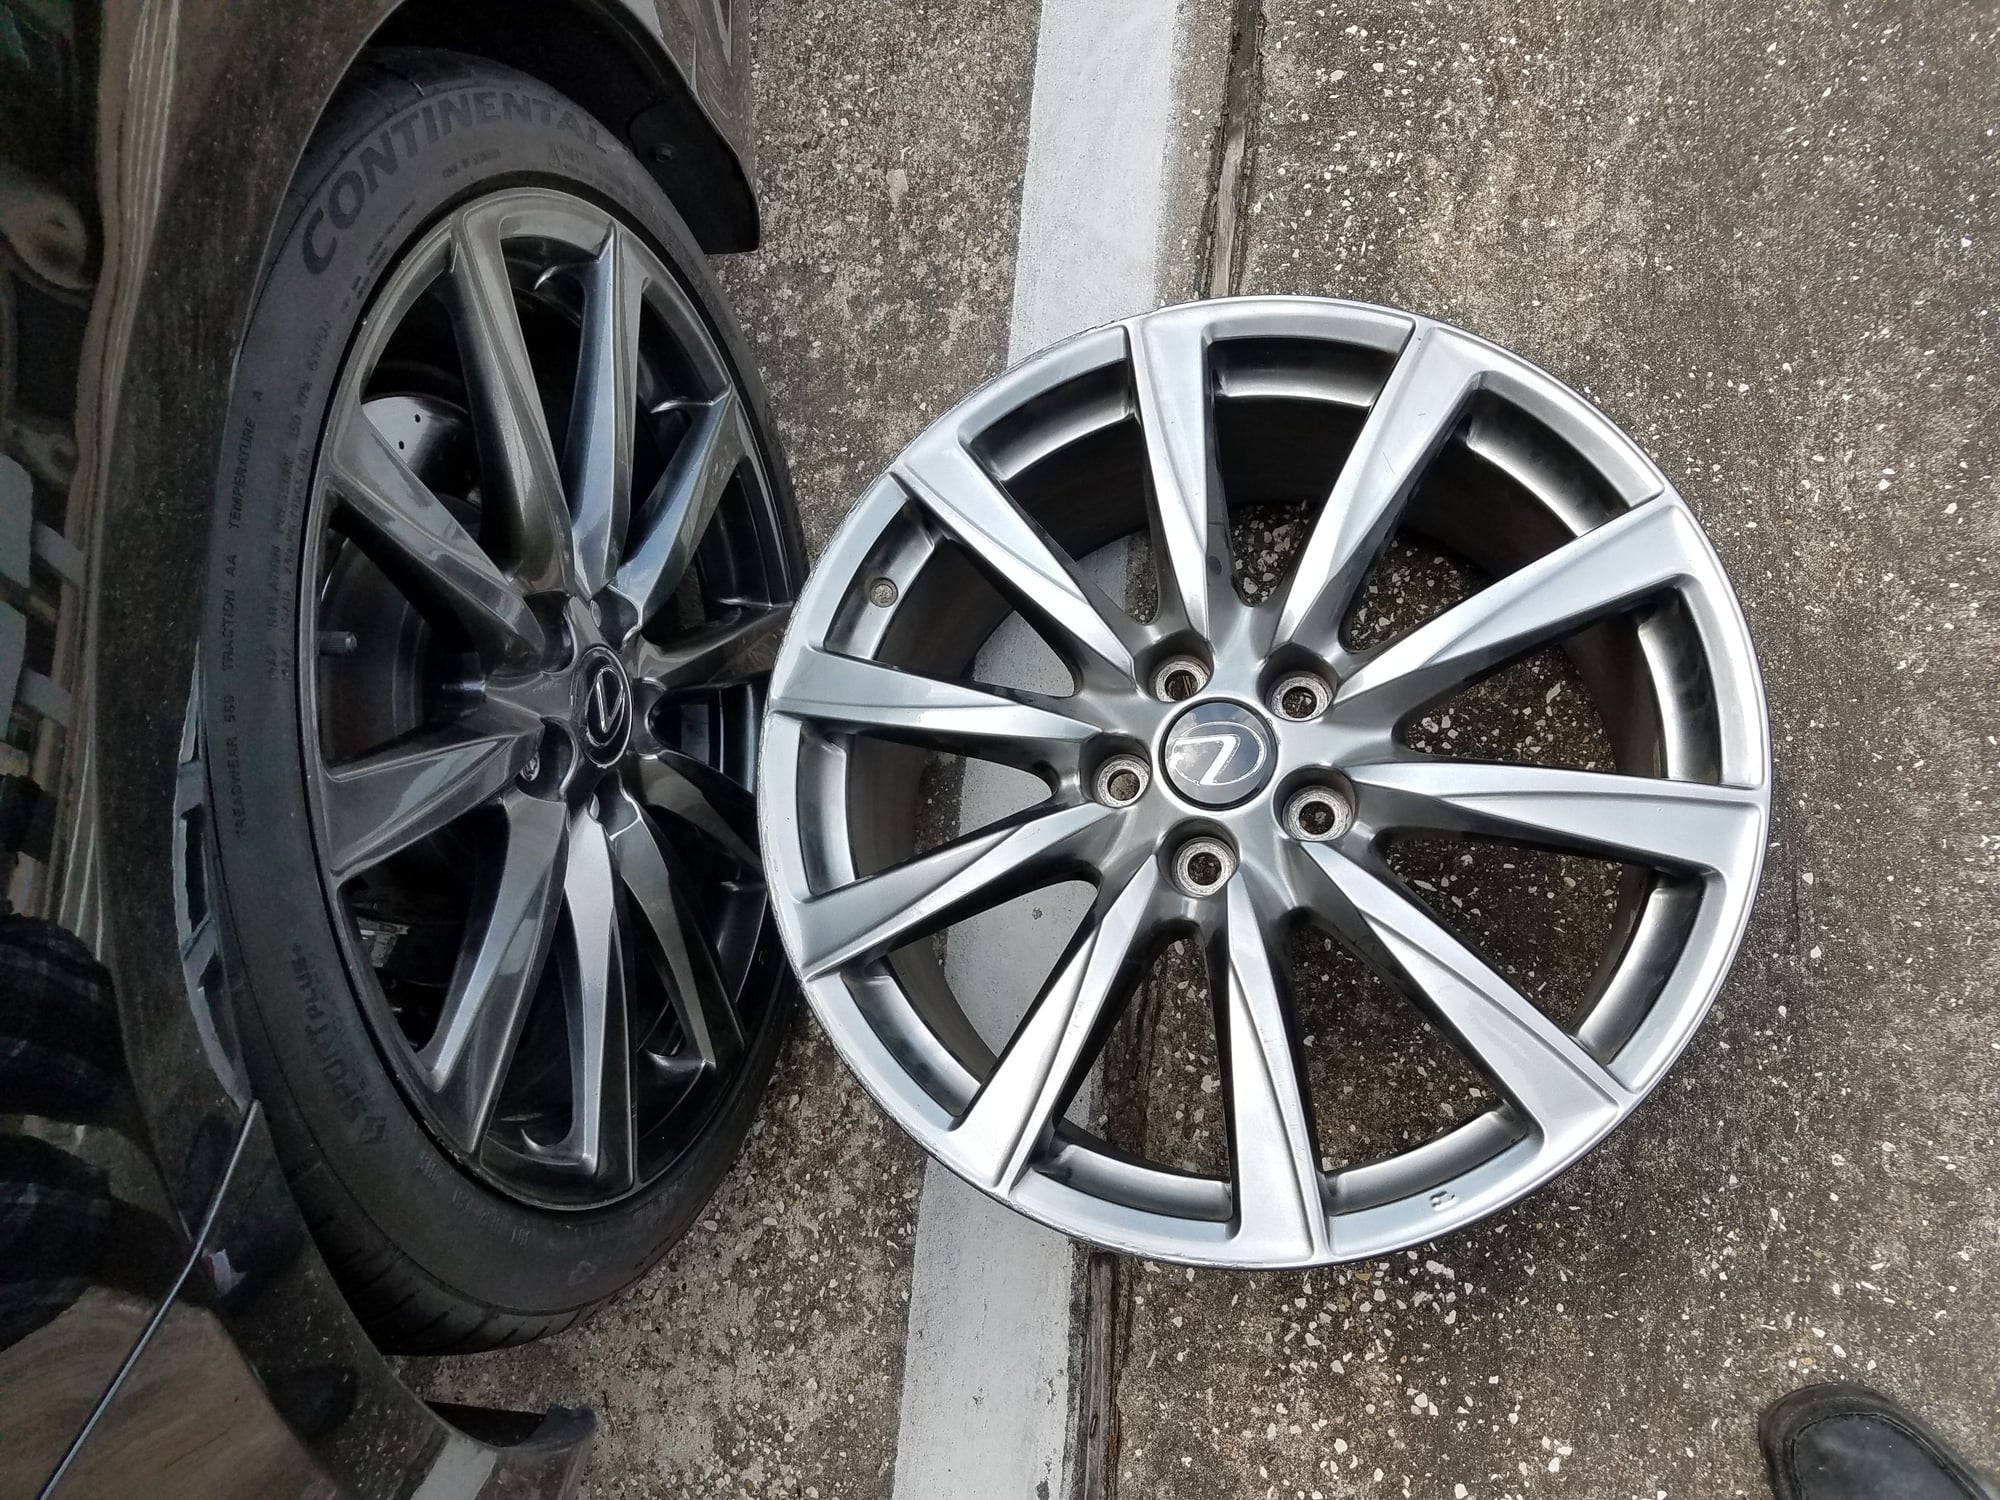 2016 Audi A3 Sportback e-tron - 19" OEM 2008 IS-F Rear Wheel, Spacers - Wheels and Tires/Axles - $100 - Houston, TX 77008, United States